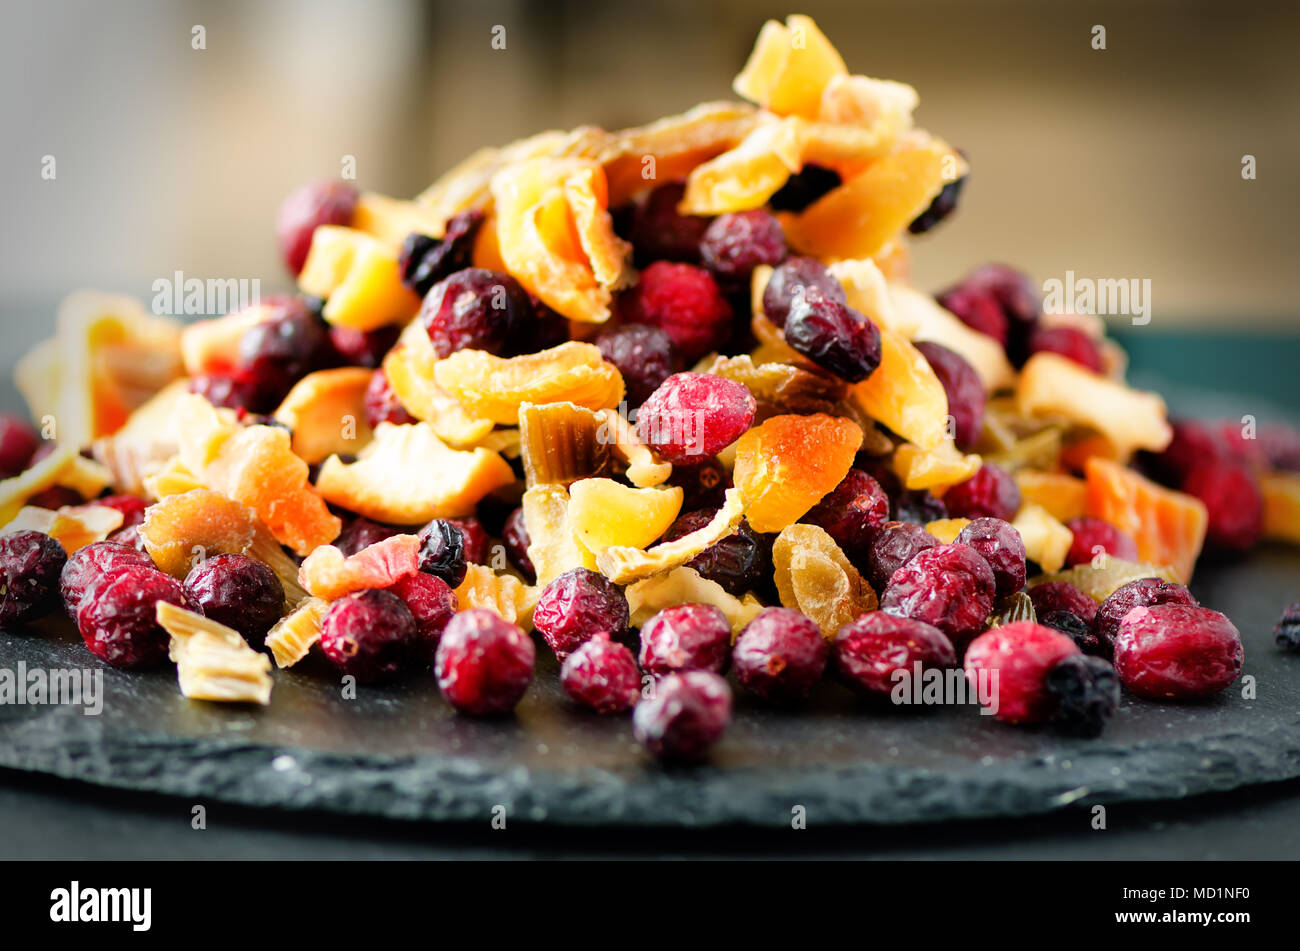 Sweet mix dried fruits on stone. Cranberry, rhubarb, apple, mango, cherry, peach, apricot. High dose vitamin C. Colorful background. Stock Photo